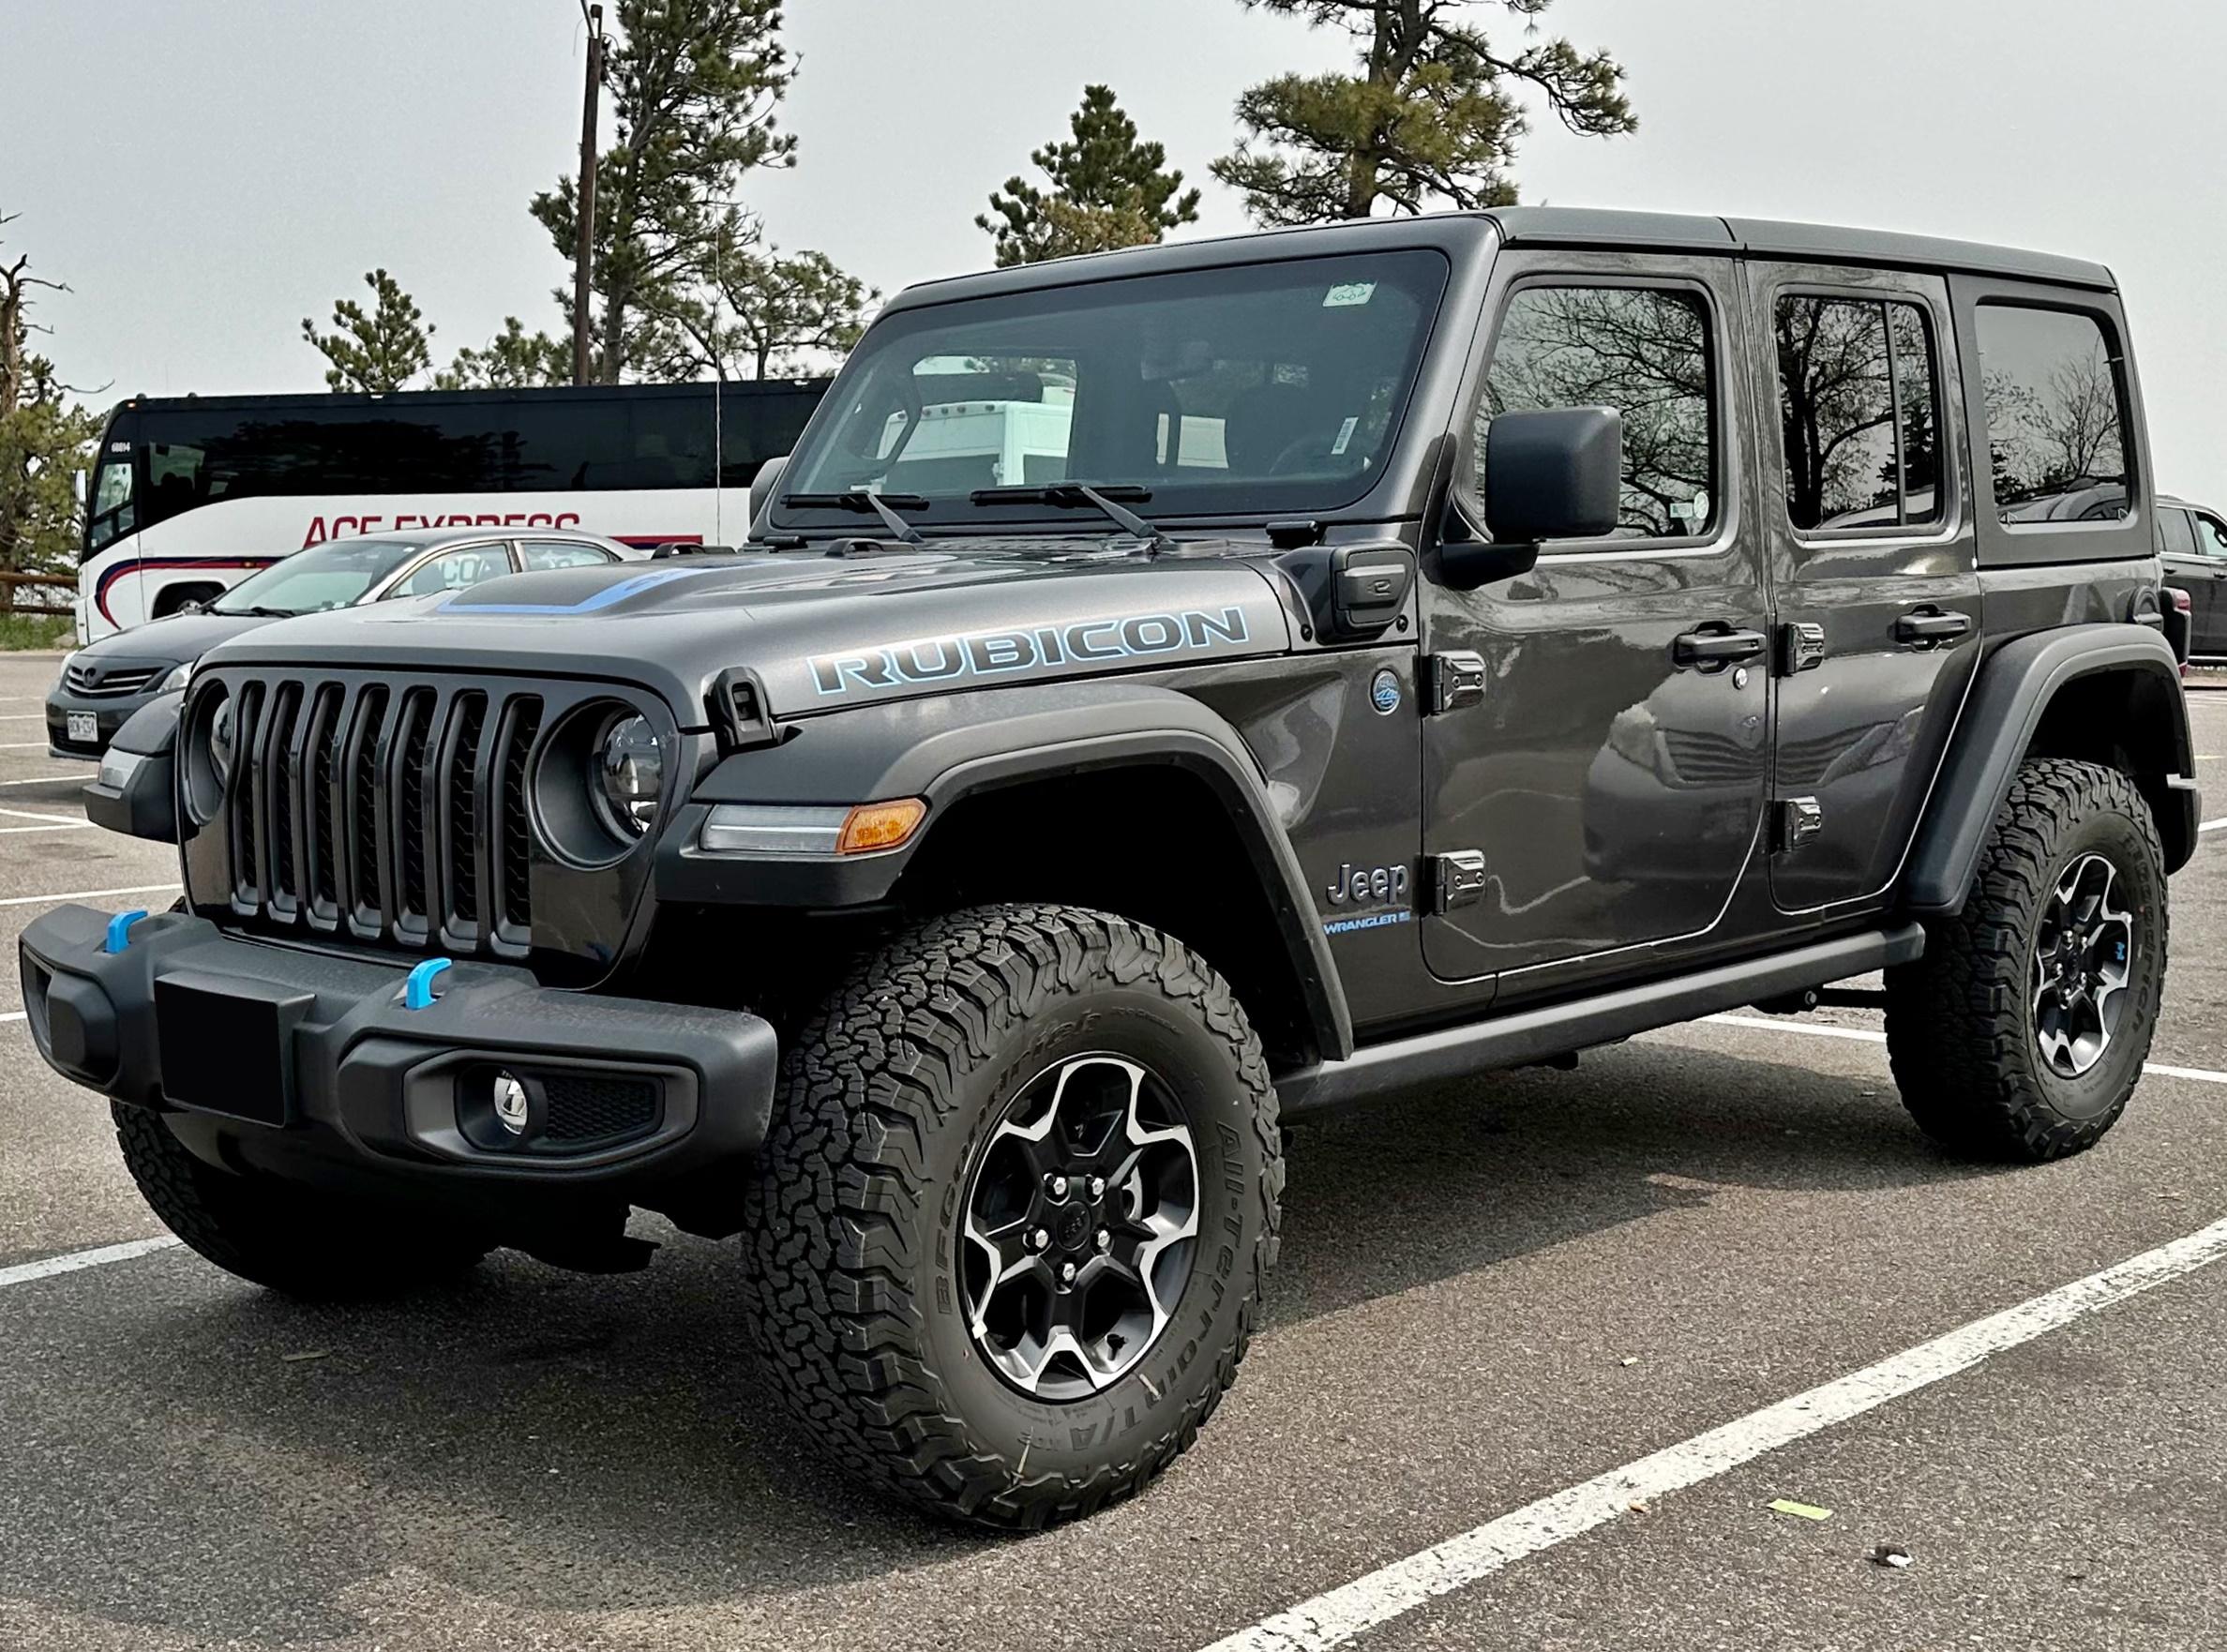 Comparison of new versus used Jeep engines